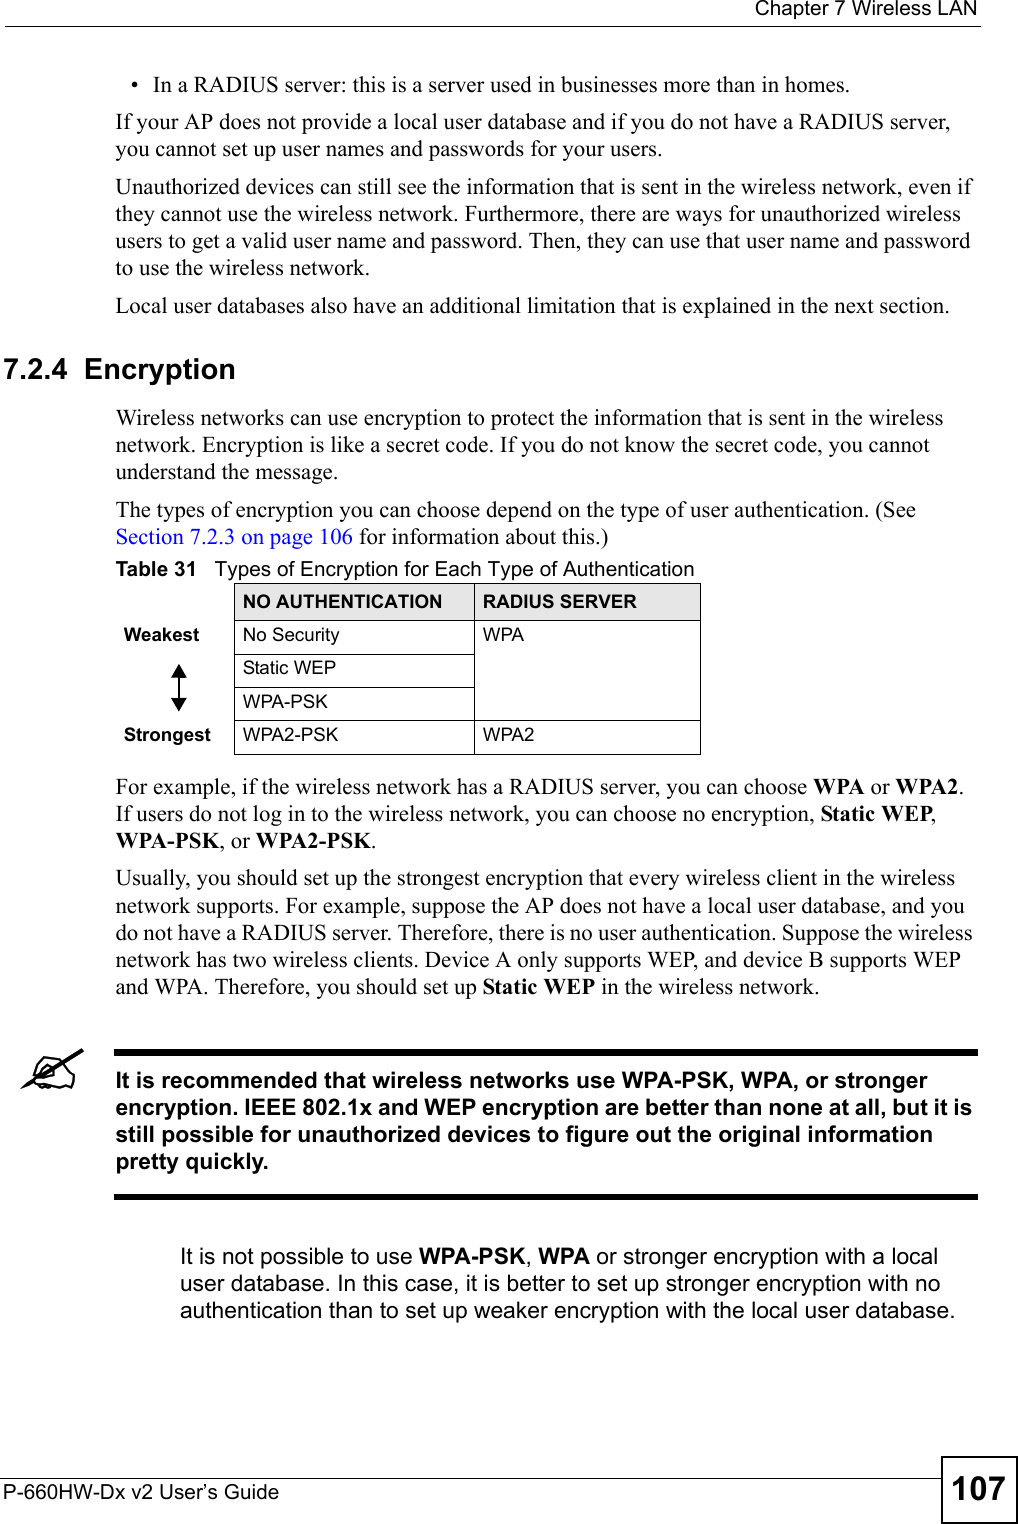  Chapter 7 Wireless LANP-660HW-Dx v2 User’s Guide 107• In a RADIUS server: this is a server used in businesses more than in homes.If your AP does not provide a local user database and if you do not have a RADIUS server, you cannot set up user names and passwords for your users.Unauthorized devices can still see the information that is sent in the wireless network, even if they cannot use the wireless network. Furthermore, there are ways for unauthorized wireless users to get a valid user name and password. Then, they can use that user name and password to use the wireless network.Local user databases also have an additional limitation that is explained in the next section.7.2.4  EncryptionWireless networks can use encryption to protect the information that is sent in the wireless network. Encryption is like a secret code. If you do not know the secret code, you cannot understand the message.The types of encryption you can choose depend on the type of user authentication. (See Section 7.2.3 on page 106 for information about this.)For example, if the wireless network has a RADIUS server, you can choose WPA or WPA2. If users do not log in to the wireless network, you can choose no encryption, Static WEP, WPA-PSK, or WPA2-PSK.Usually, you should set up the strongest encryption that every wireless client in the wireless network supports. For example, suppose the AP does not have a local user database, and you do not have a RADIUS server. Therefore, there is no user authentication. Suppose the wireless network has two wireless clients. Device A only supports WEP, and device B supports WEP and WPA. Therefore, you should set up Static WEP in the wireless network.&quot;It is recommended that wireless networks use WPA-PSK, WPA, or stronger encryption. IEEE 802.1x and WEP encryption are better than none at all, but it is still possible for unauthorized devices to figure out the original information pretty quickly.It is not possible to use WPA-PSK, WPA or stronger encryption with a local user database. In this case, it is better to set up stronger encryption with no authentication than to set up weaker encryption with the local user database.Table 31   Types of Encryption for Each Type of AuthenticationNO AUTHENTICATION RADIUS SERVERWeakest No Security WPAStatic WEPWPA-PSKStrongest WPA2-PSK WPA2